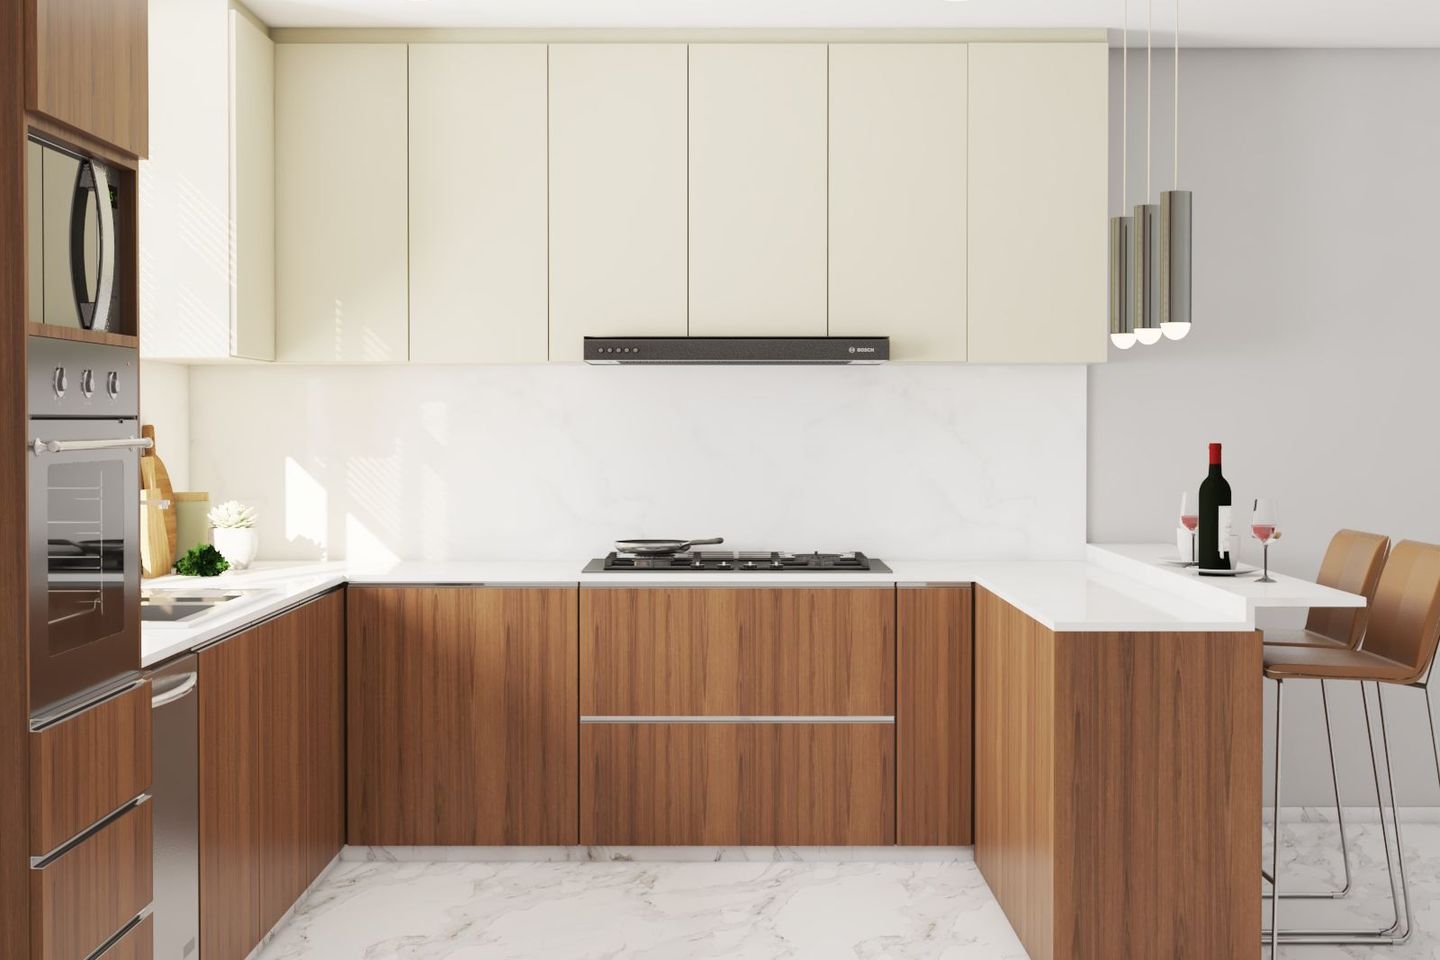 White And Brown Scratch-Resistance Laminates Design For Kitchen Cabinets - Livspace